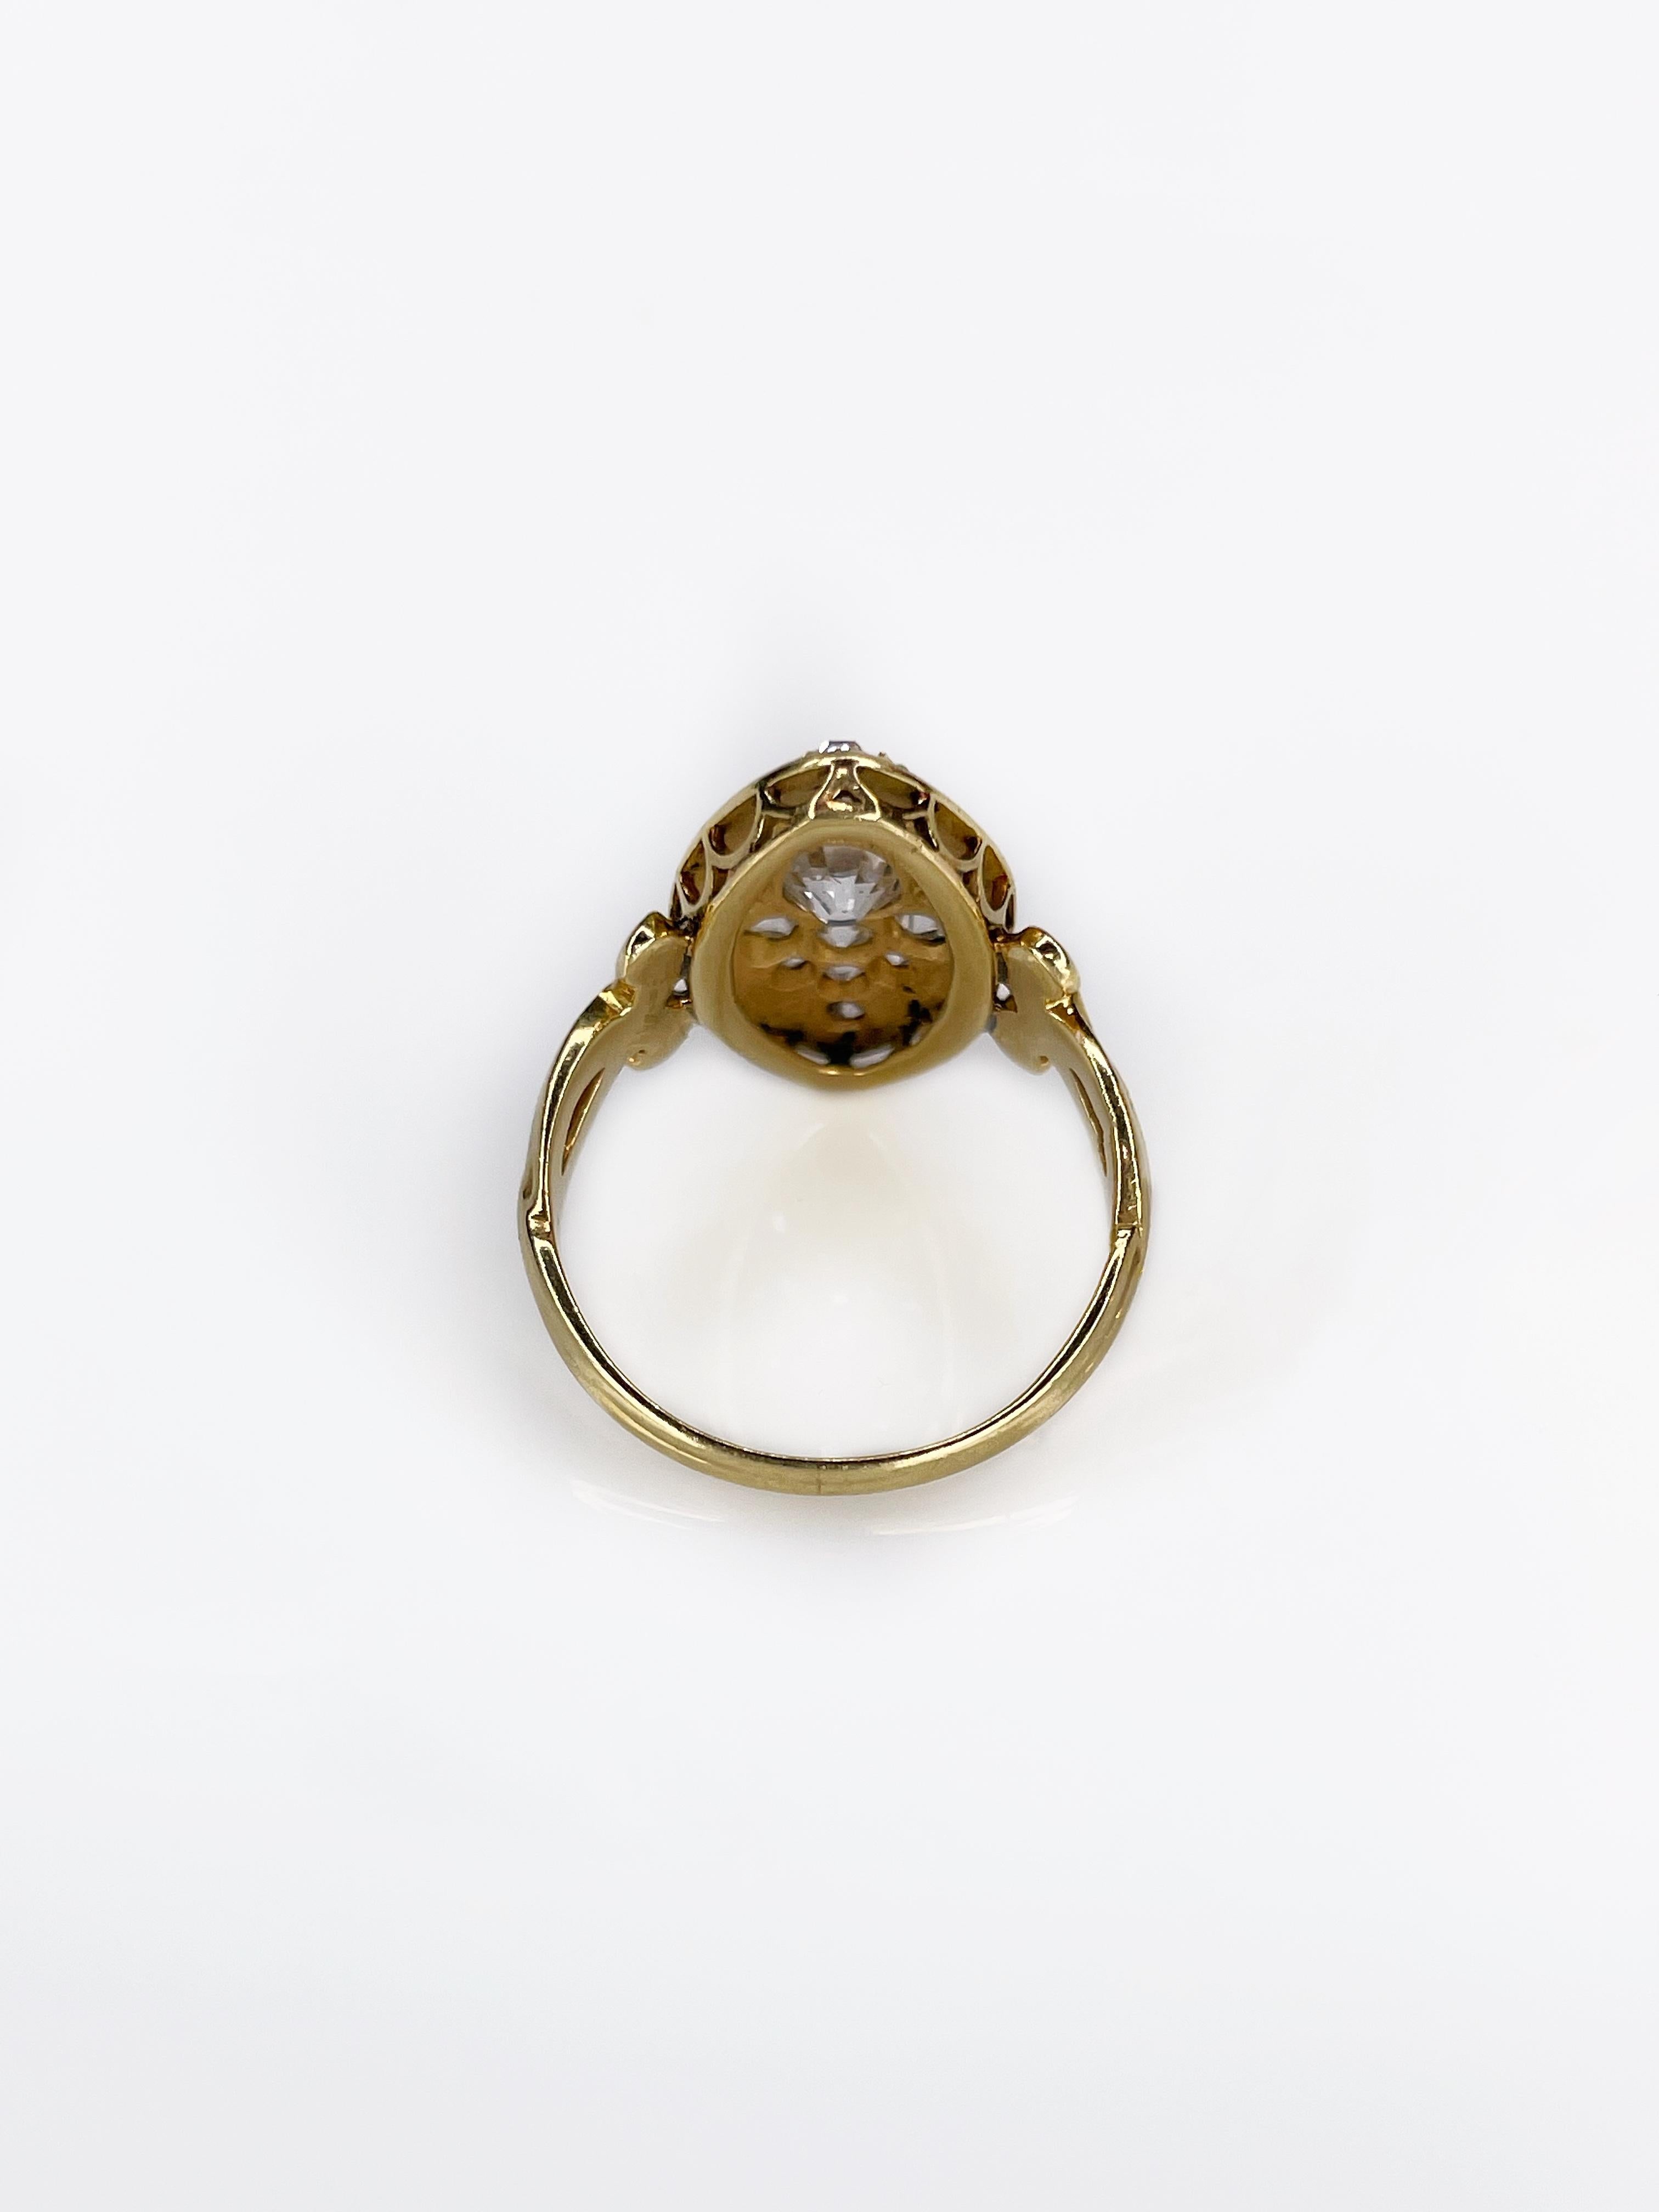 Antique Early Victorian 18K Yellow Gold Old Mine Cut Diamond Navette Ring 1